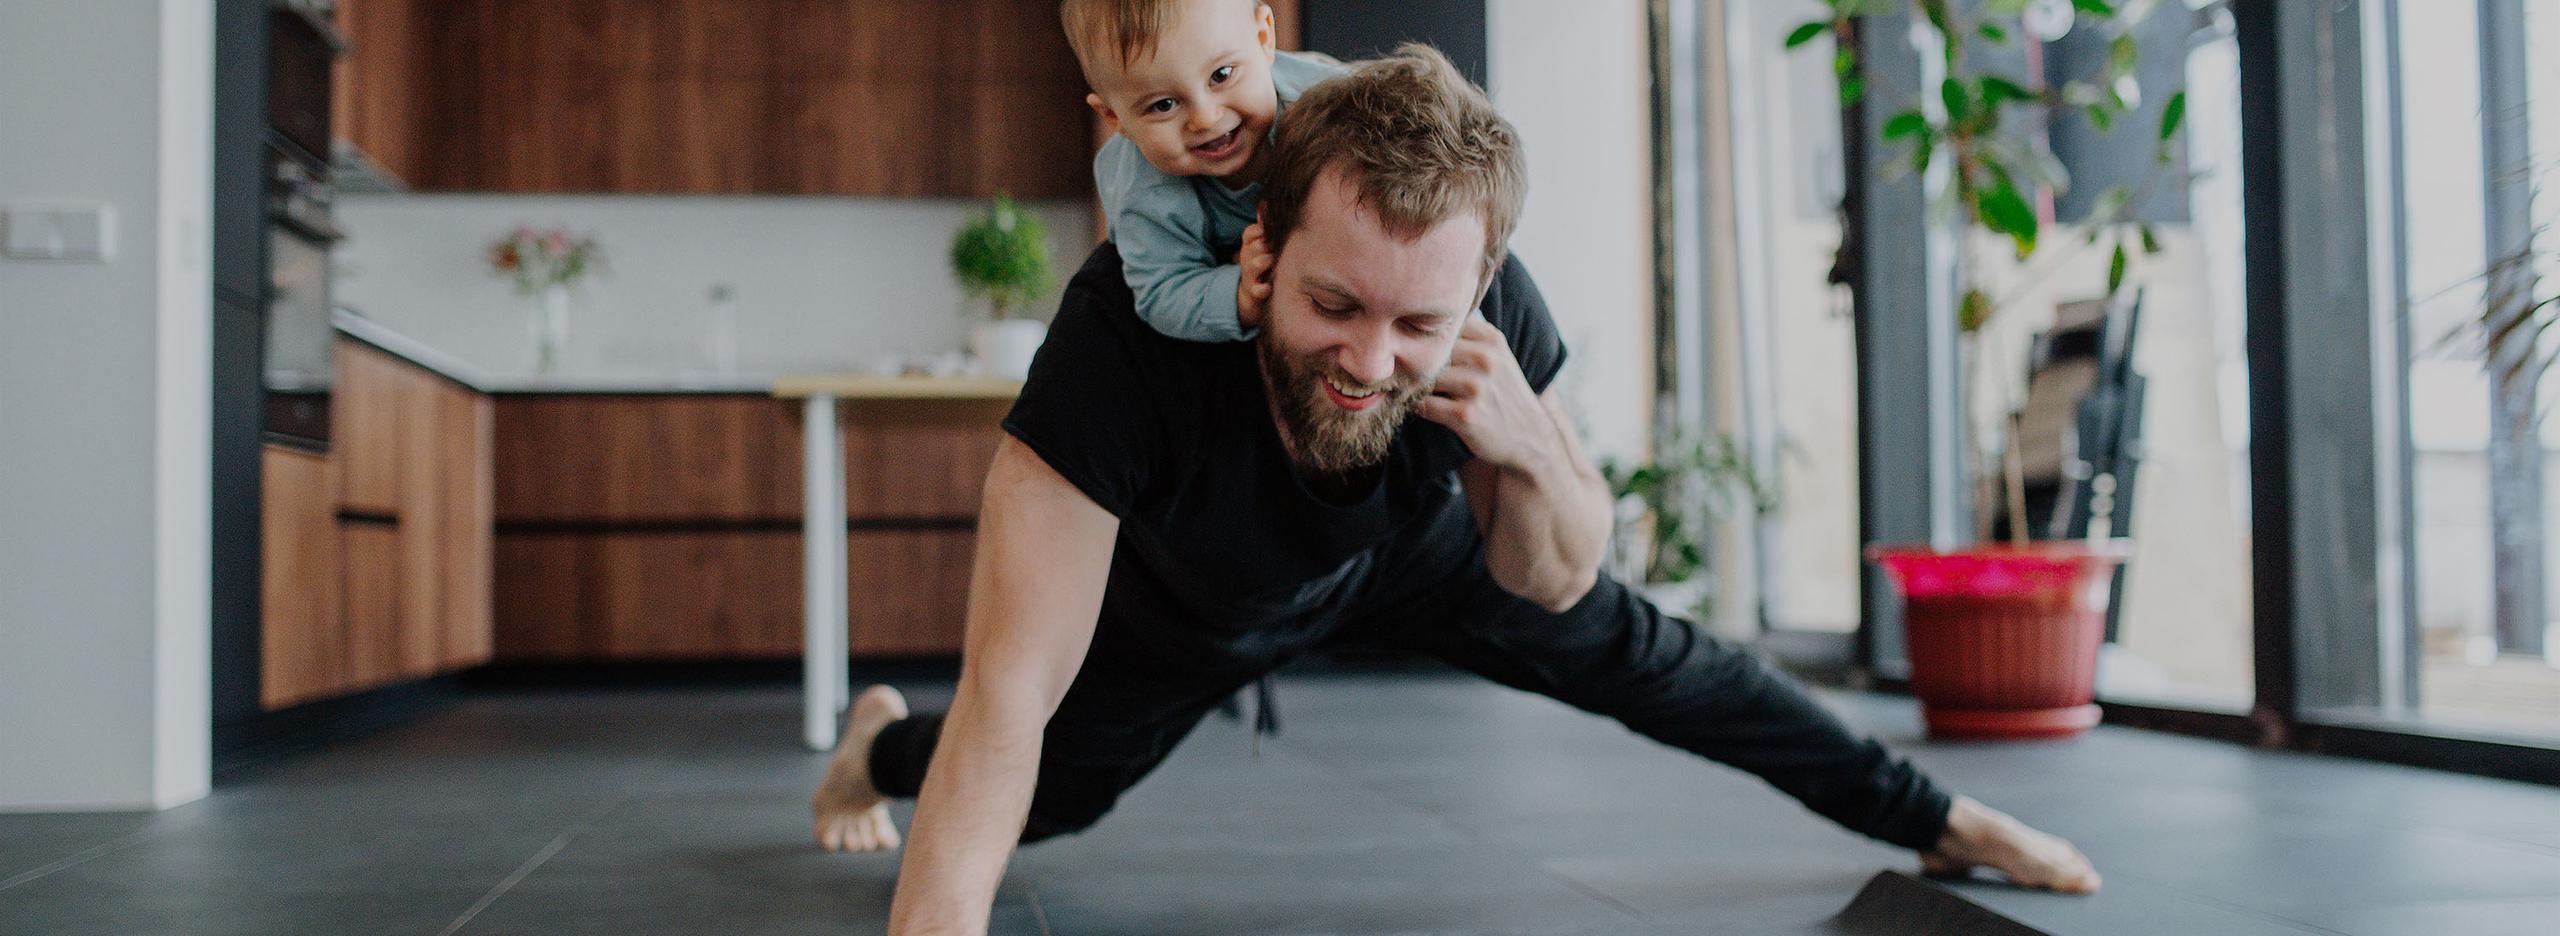 A man doing floor exercises with a baby on his back